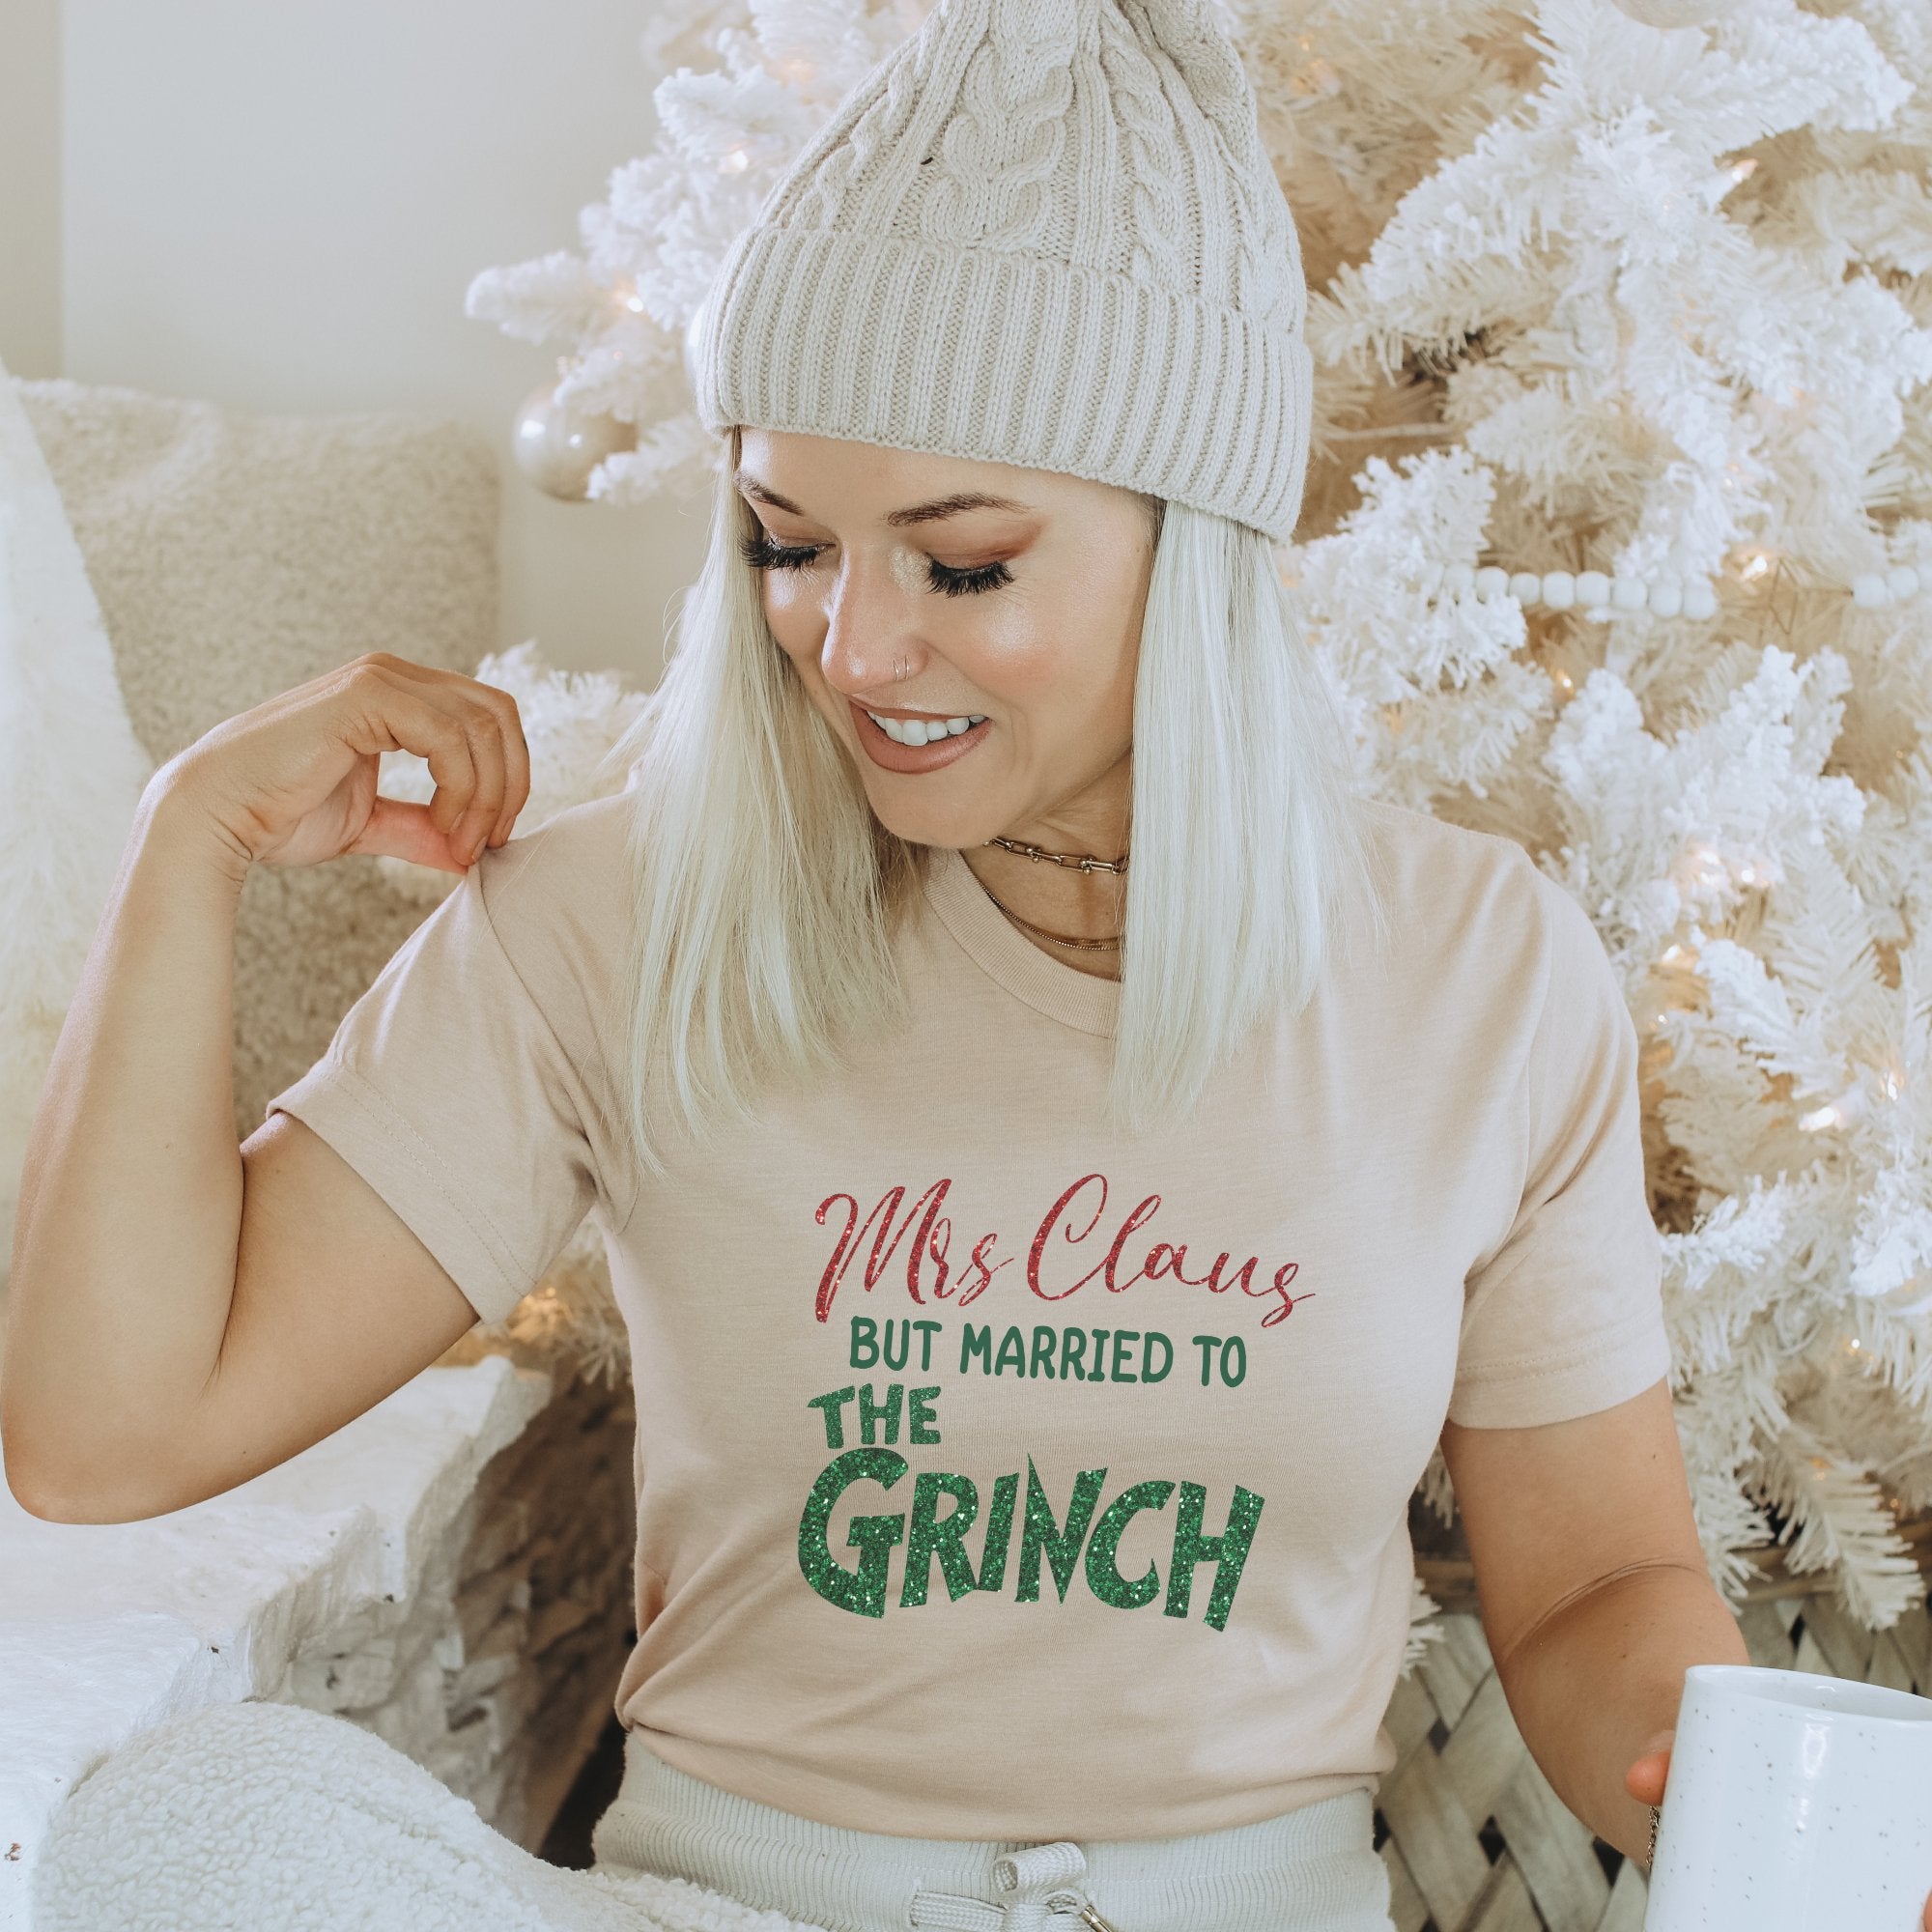 Mrs. Claus but married the Grinch Christmas T-Shirt - Trendznmore